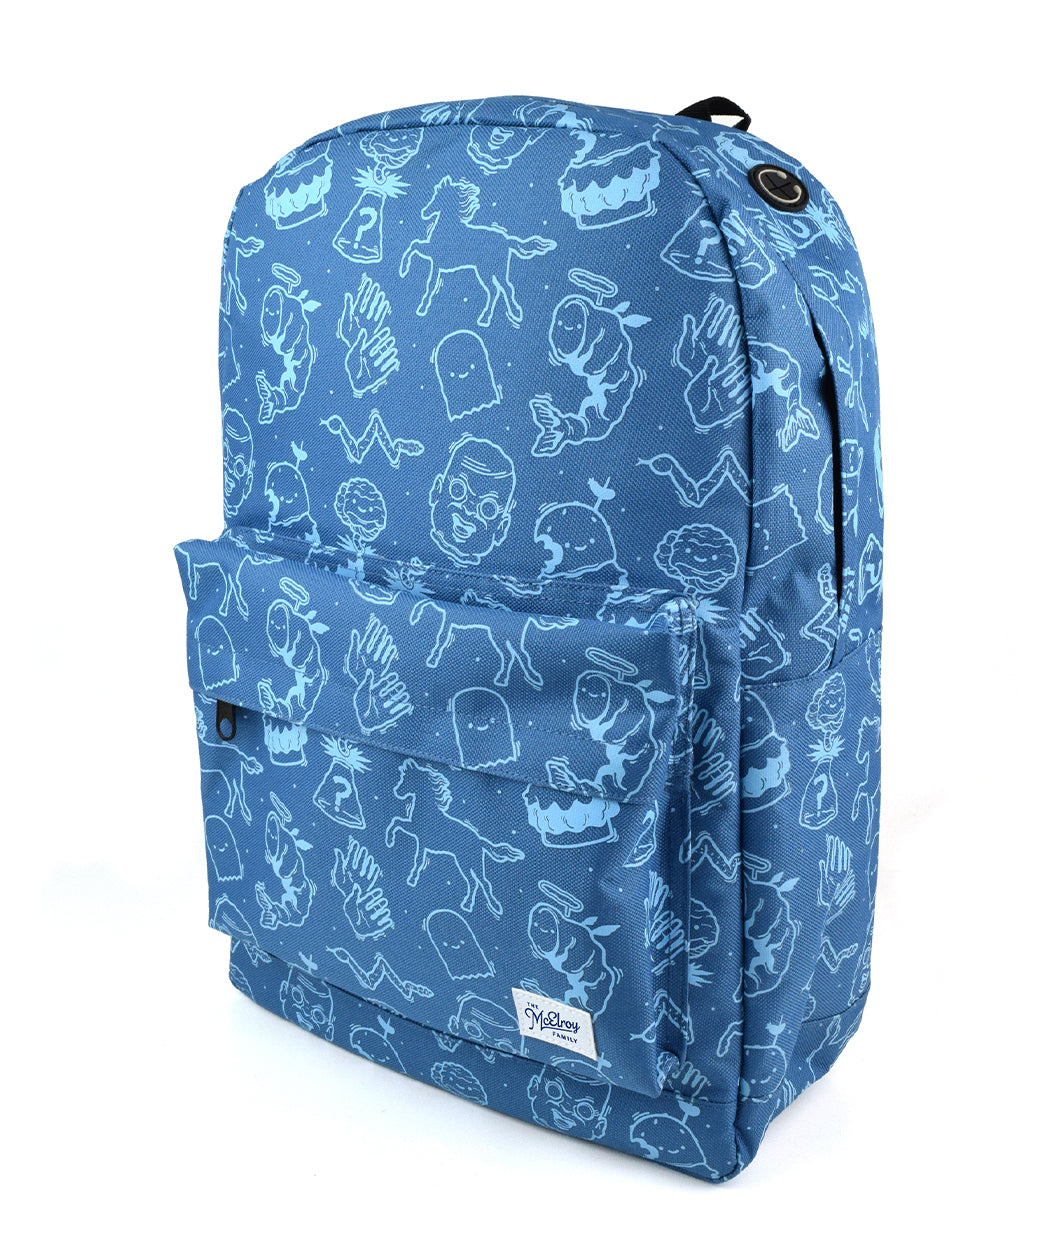 A blue backpack with light blue illustrations and a white patch on it. The patch says, "The McElroy Family" in blue. There are drawings of a doll head, a shrimp with wings and halo, a horse, a ghost, two hands waving, an angular snake, a brain bursting out of a beaker, and a burger with a bite taken out of it.